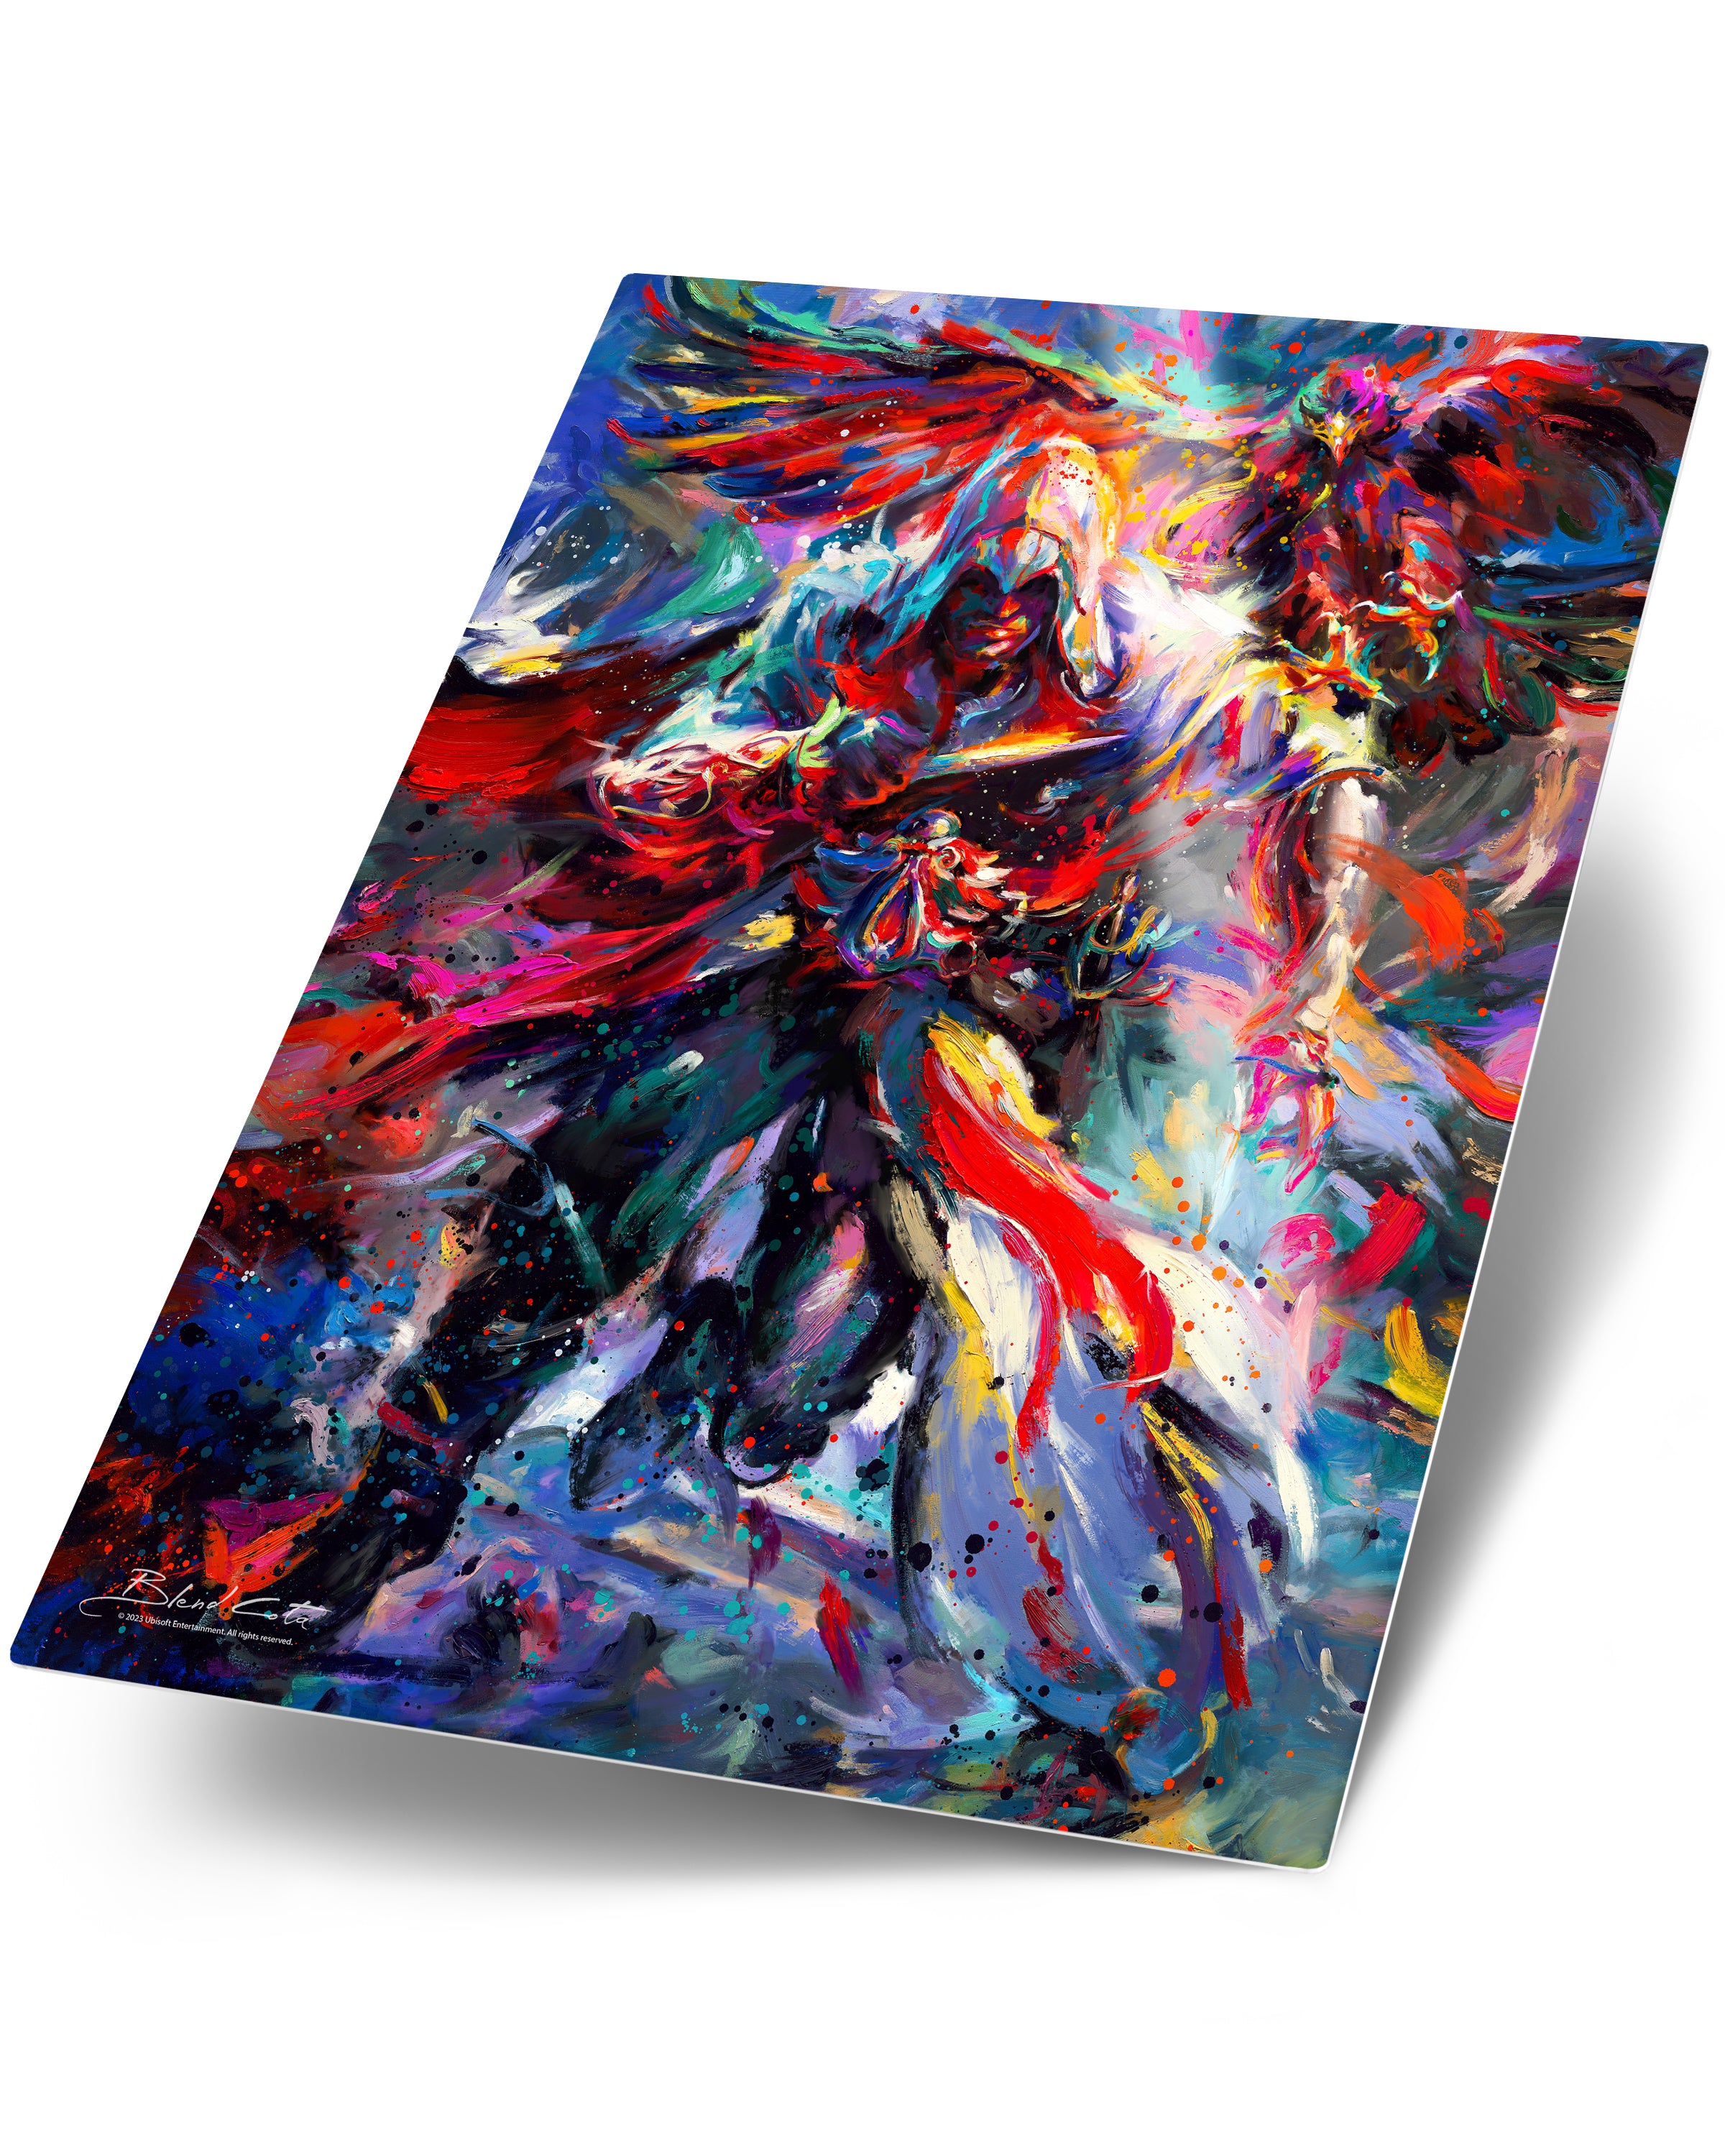 
                  
                    Glossy art print on metal of Assassin's Creed Ezio Auditore and Eagle, bursting with colorful brushstrokes in an expressionist style.
                  
                